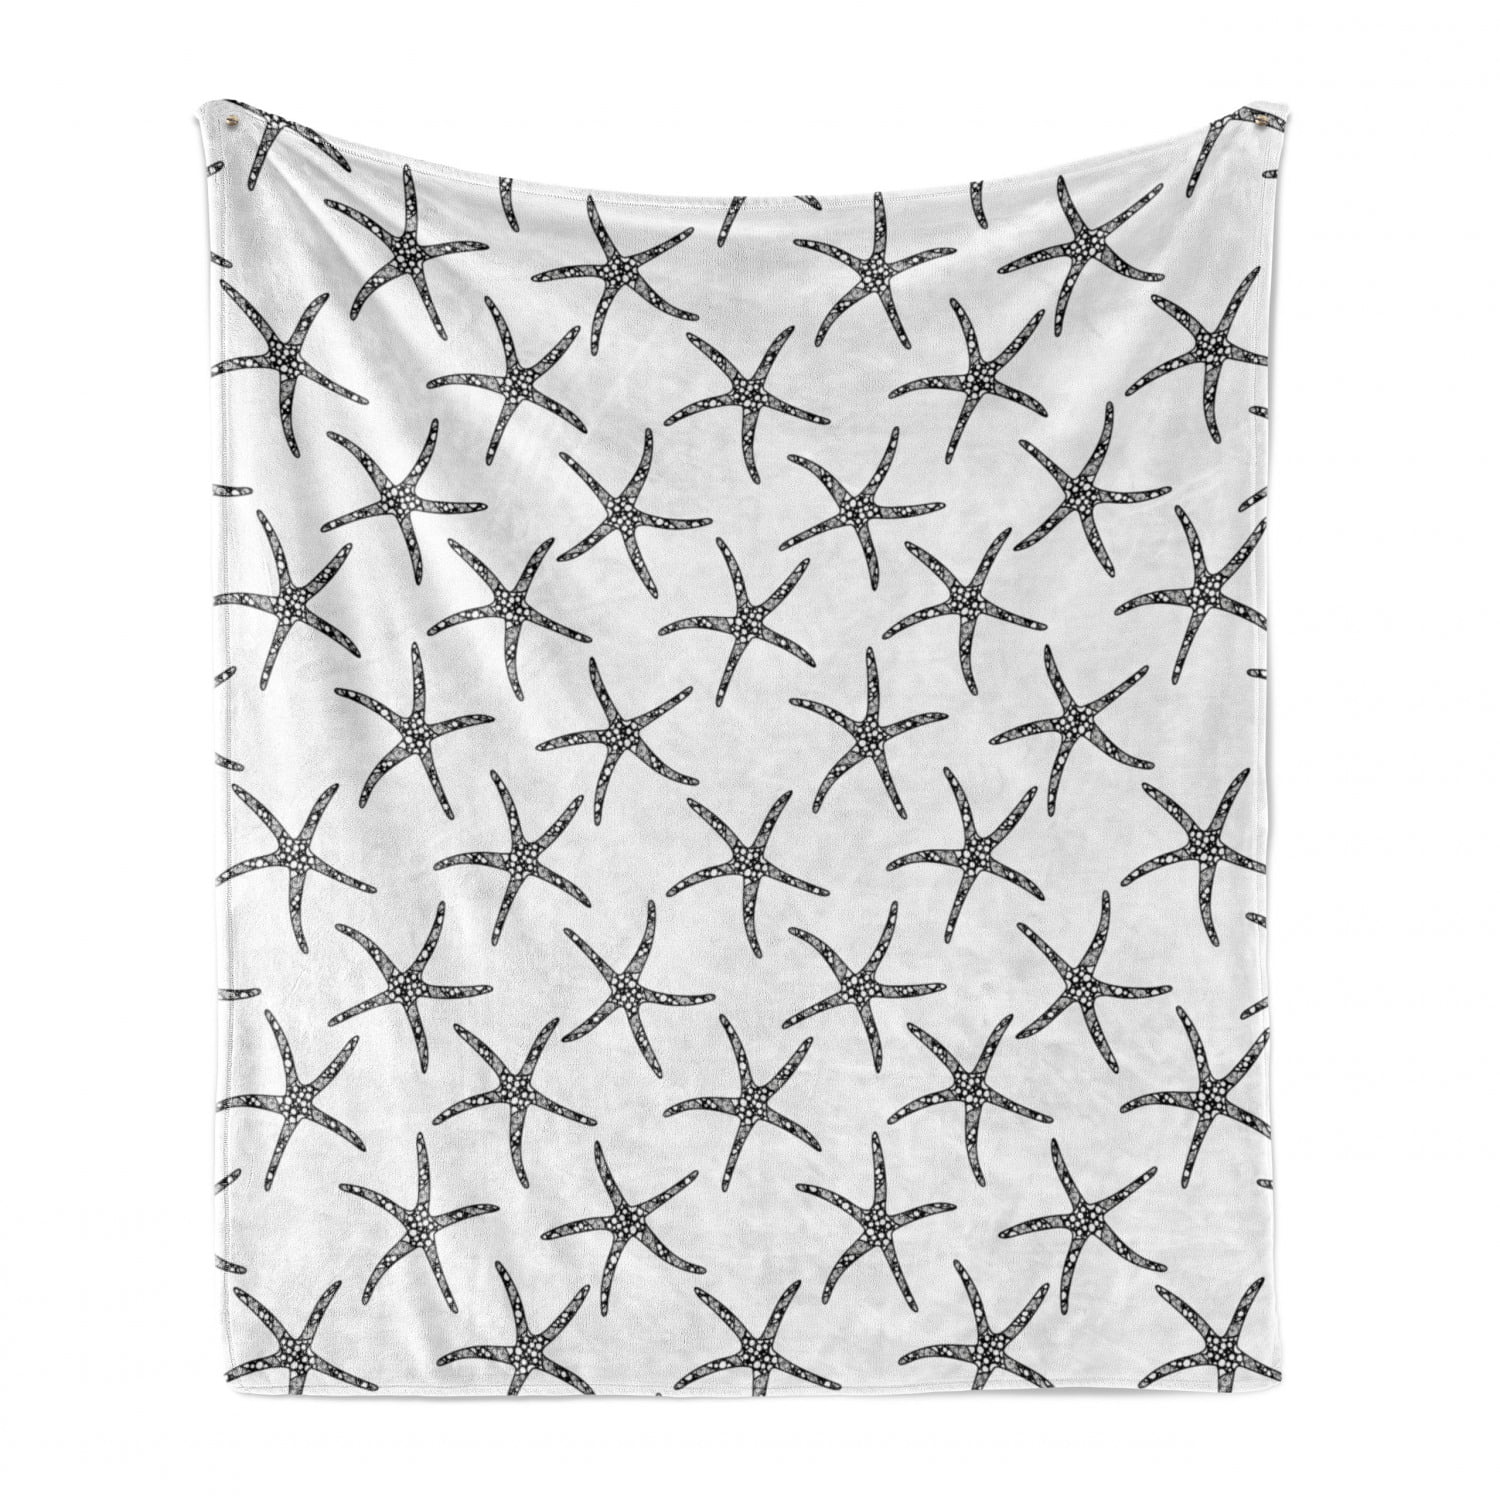 50 x 60 Cozy Plush for Indoor and Outdoor Use Charcoal Grey and White Repeating Monochromatic Marine Design of Starfish on Plain Backdrop Ambesonne Zentangle Soft Flannel Fleece Throw Blanket 